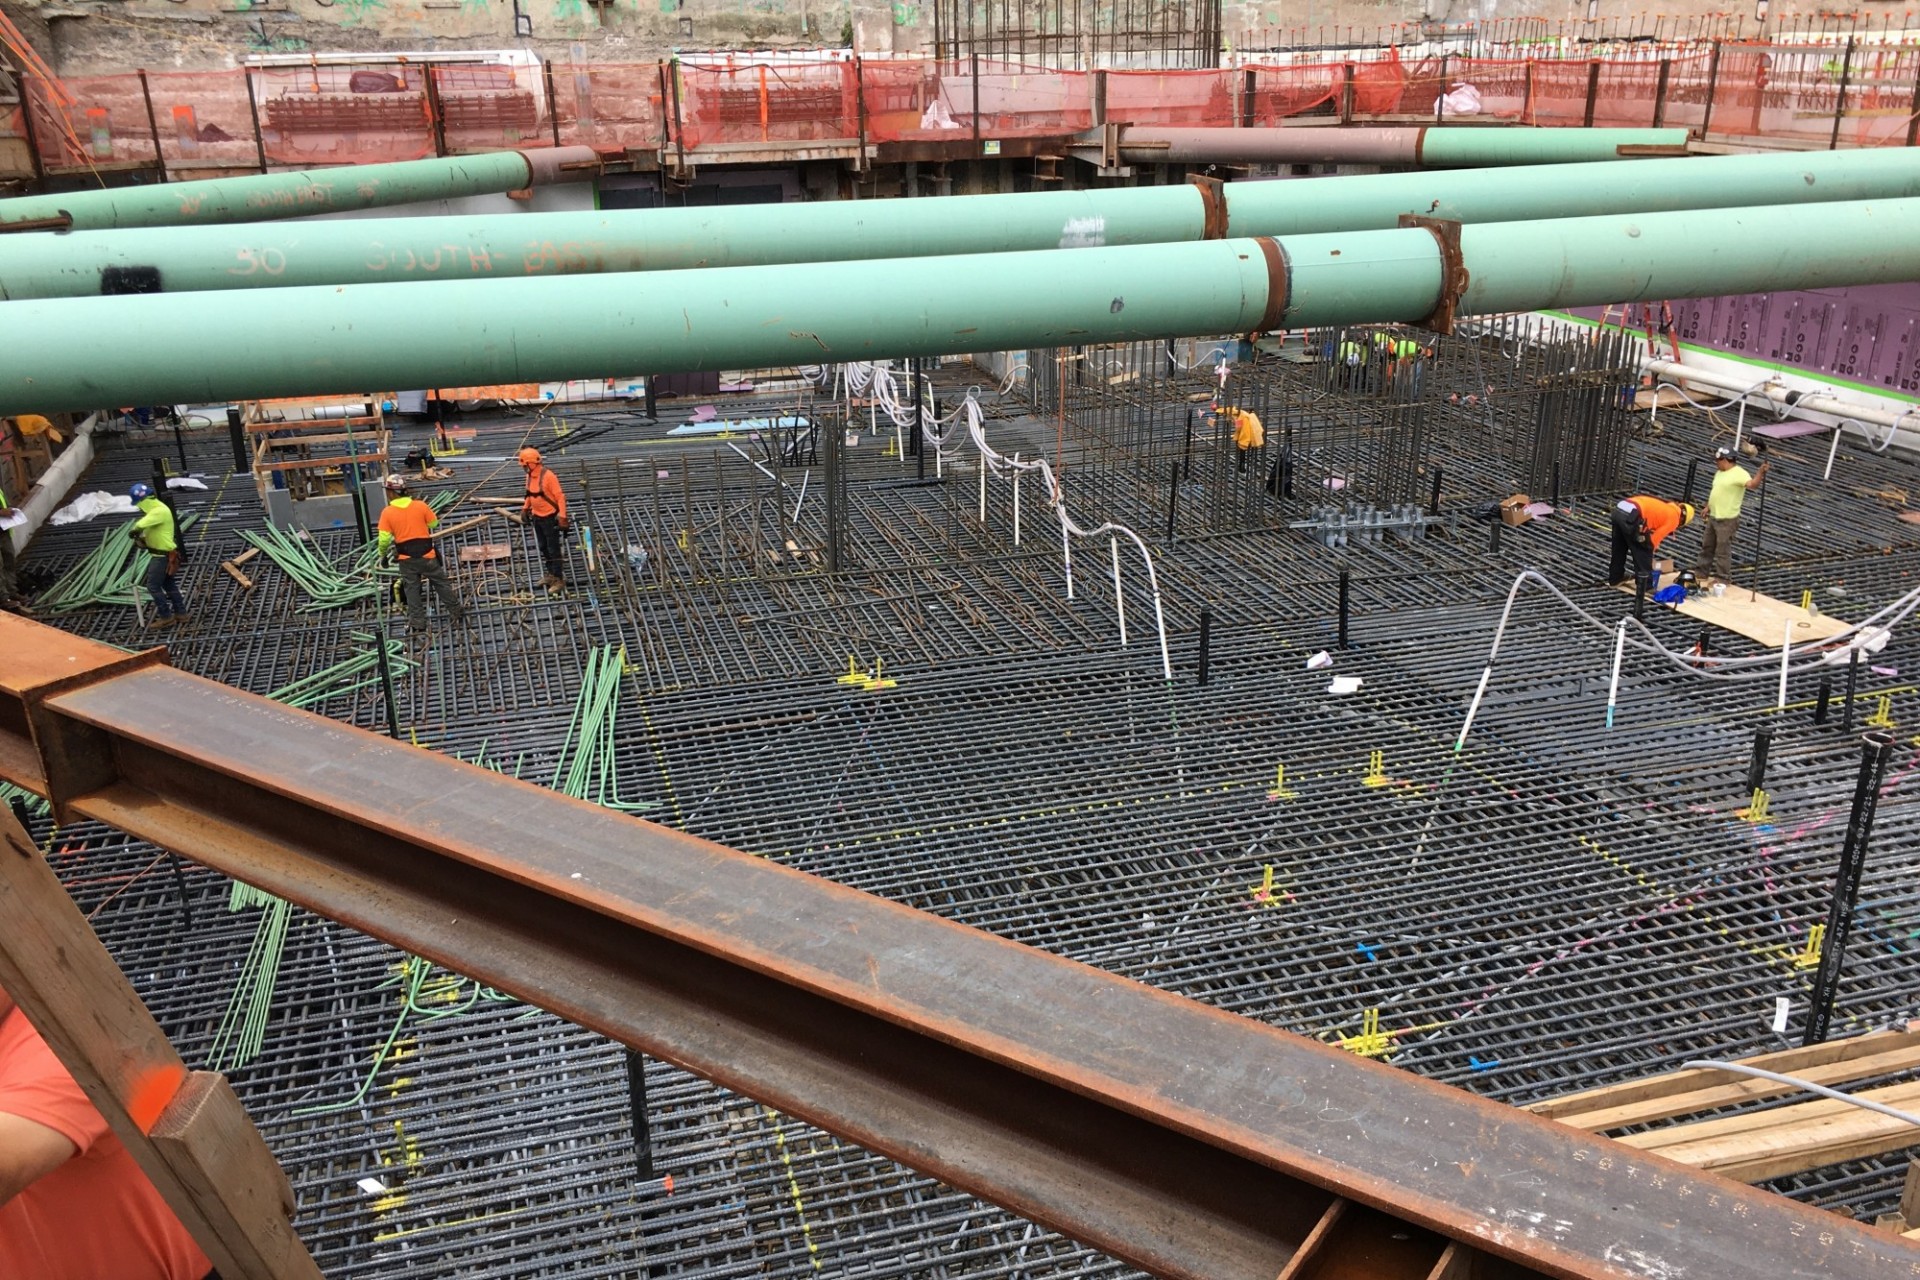 A view of the southern part of the 600 W. 125th Street construction site, with thousands of rebar placed on the ground and large green pipes running overhead.